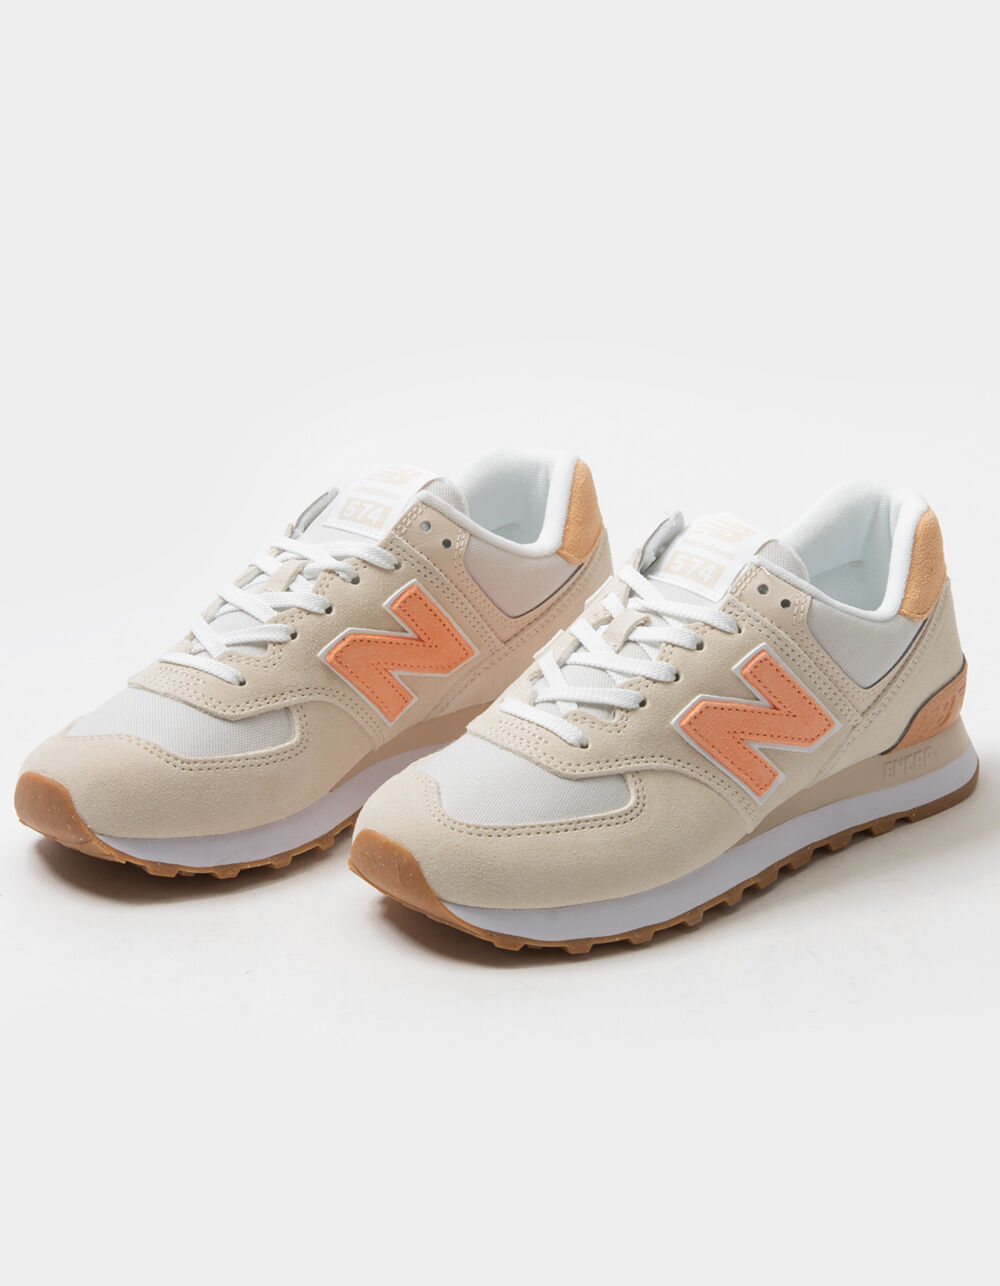 NEW BALANCE 574 Womens Shoes - TAUPE | Tillys